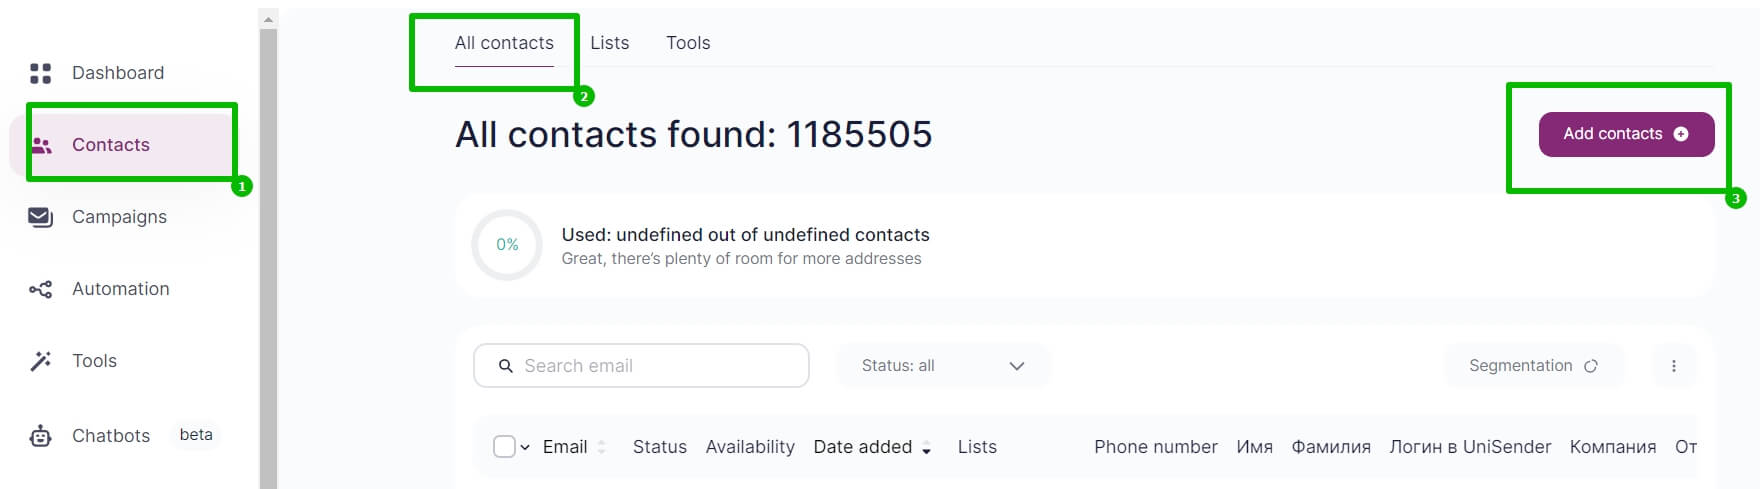 Importing contacts from Mailchimp to Selzy.